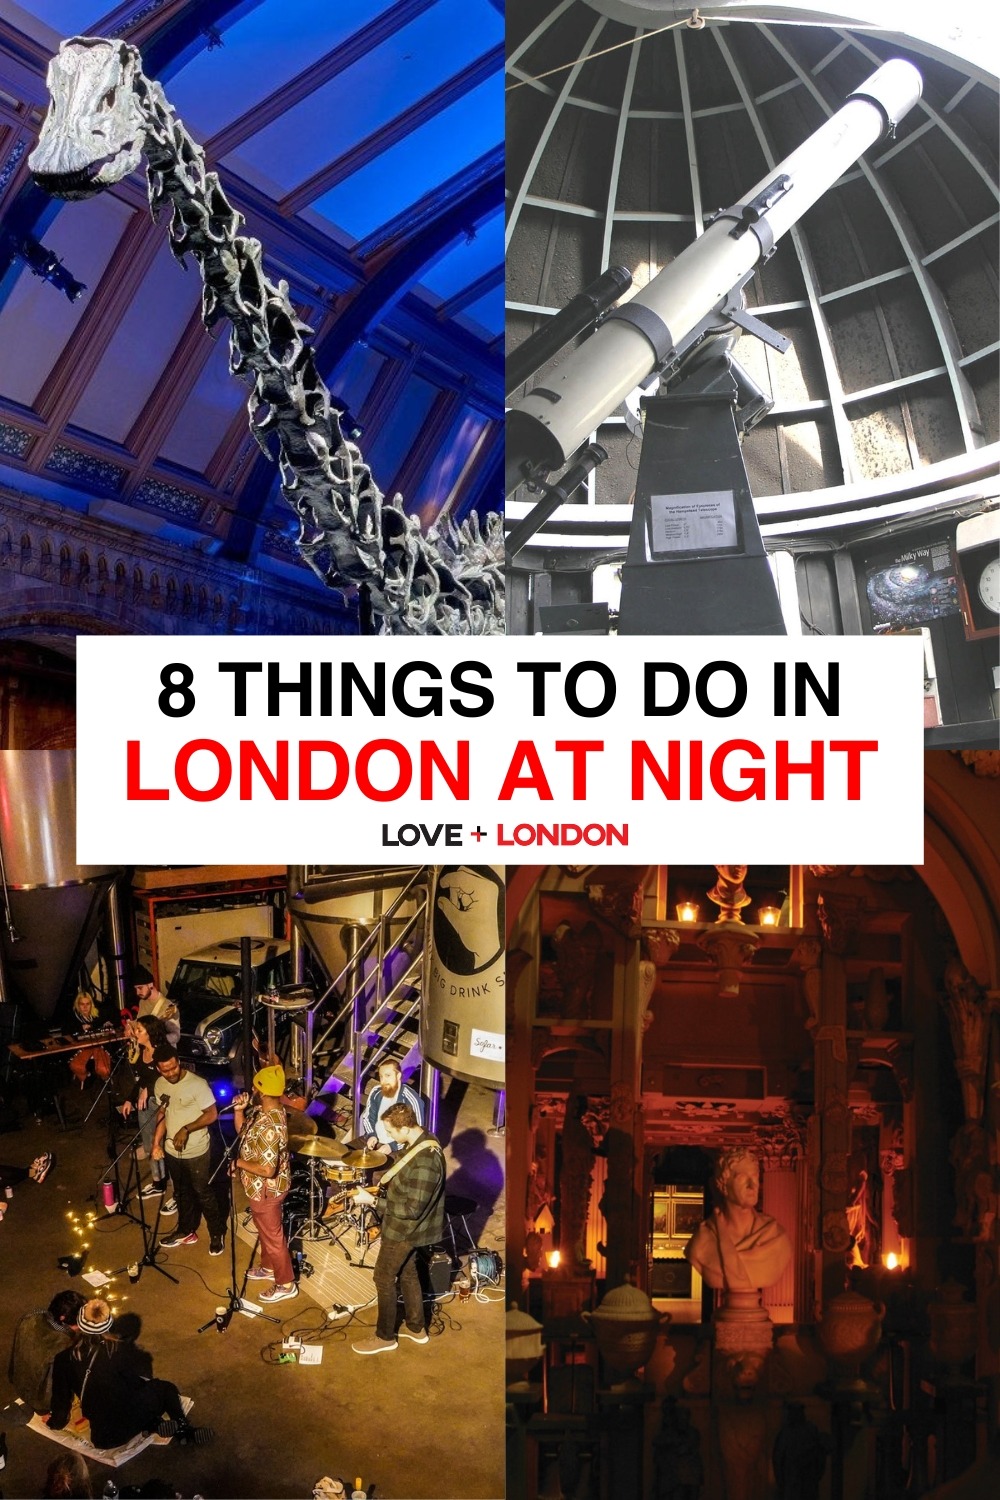 8 Things to Do in London at Night